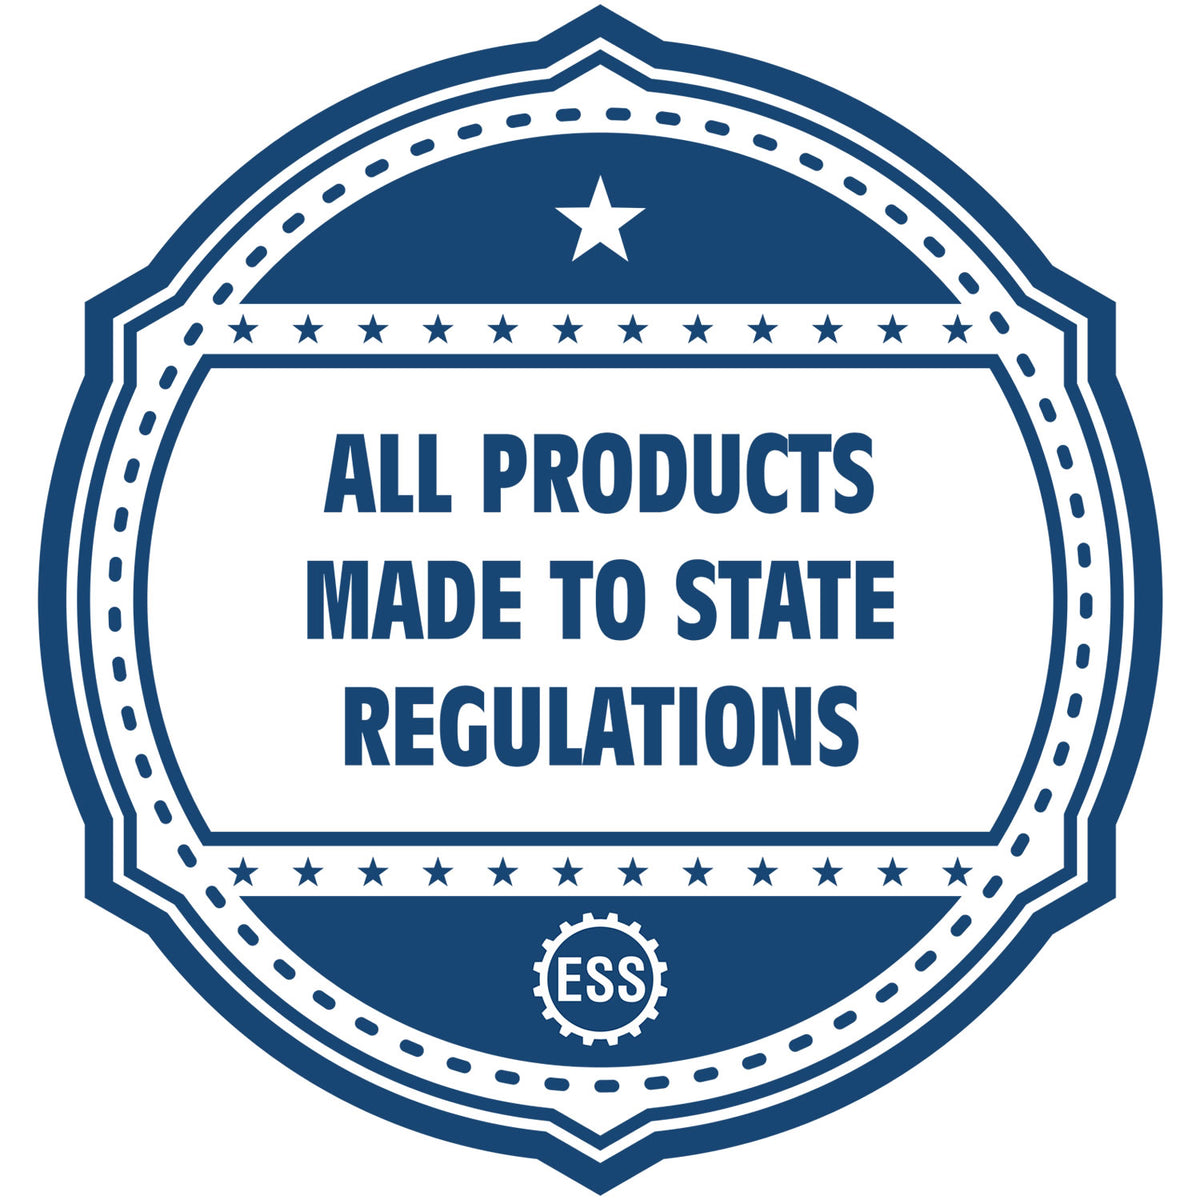 An icon or badge element for the Louisiana Professional Engineer Seal Stamp showing that this product is made in compliance with state regulations.